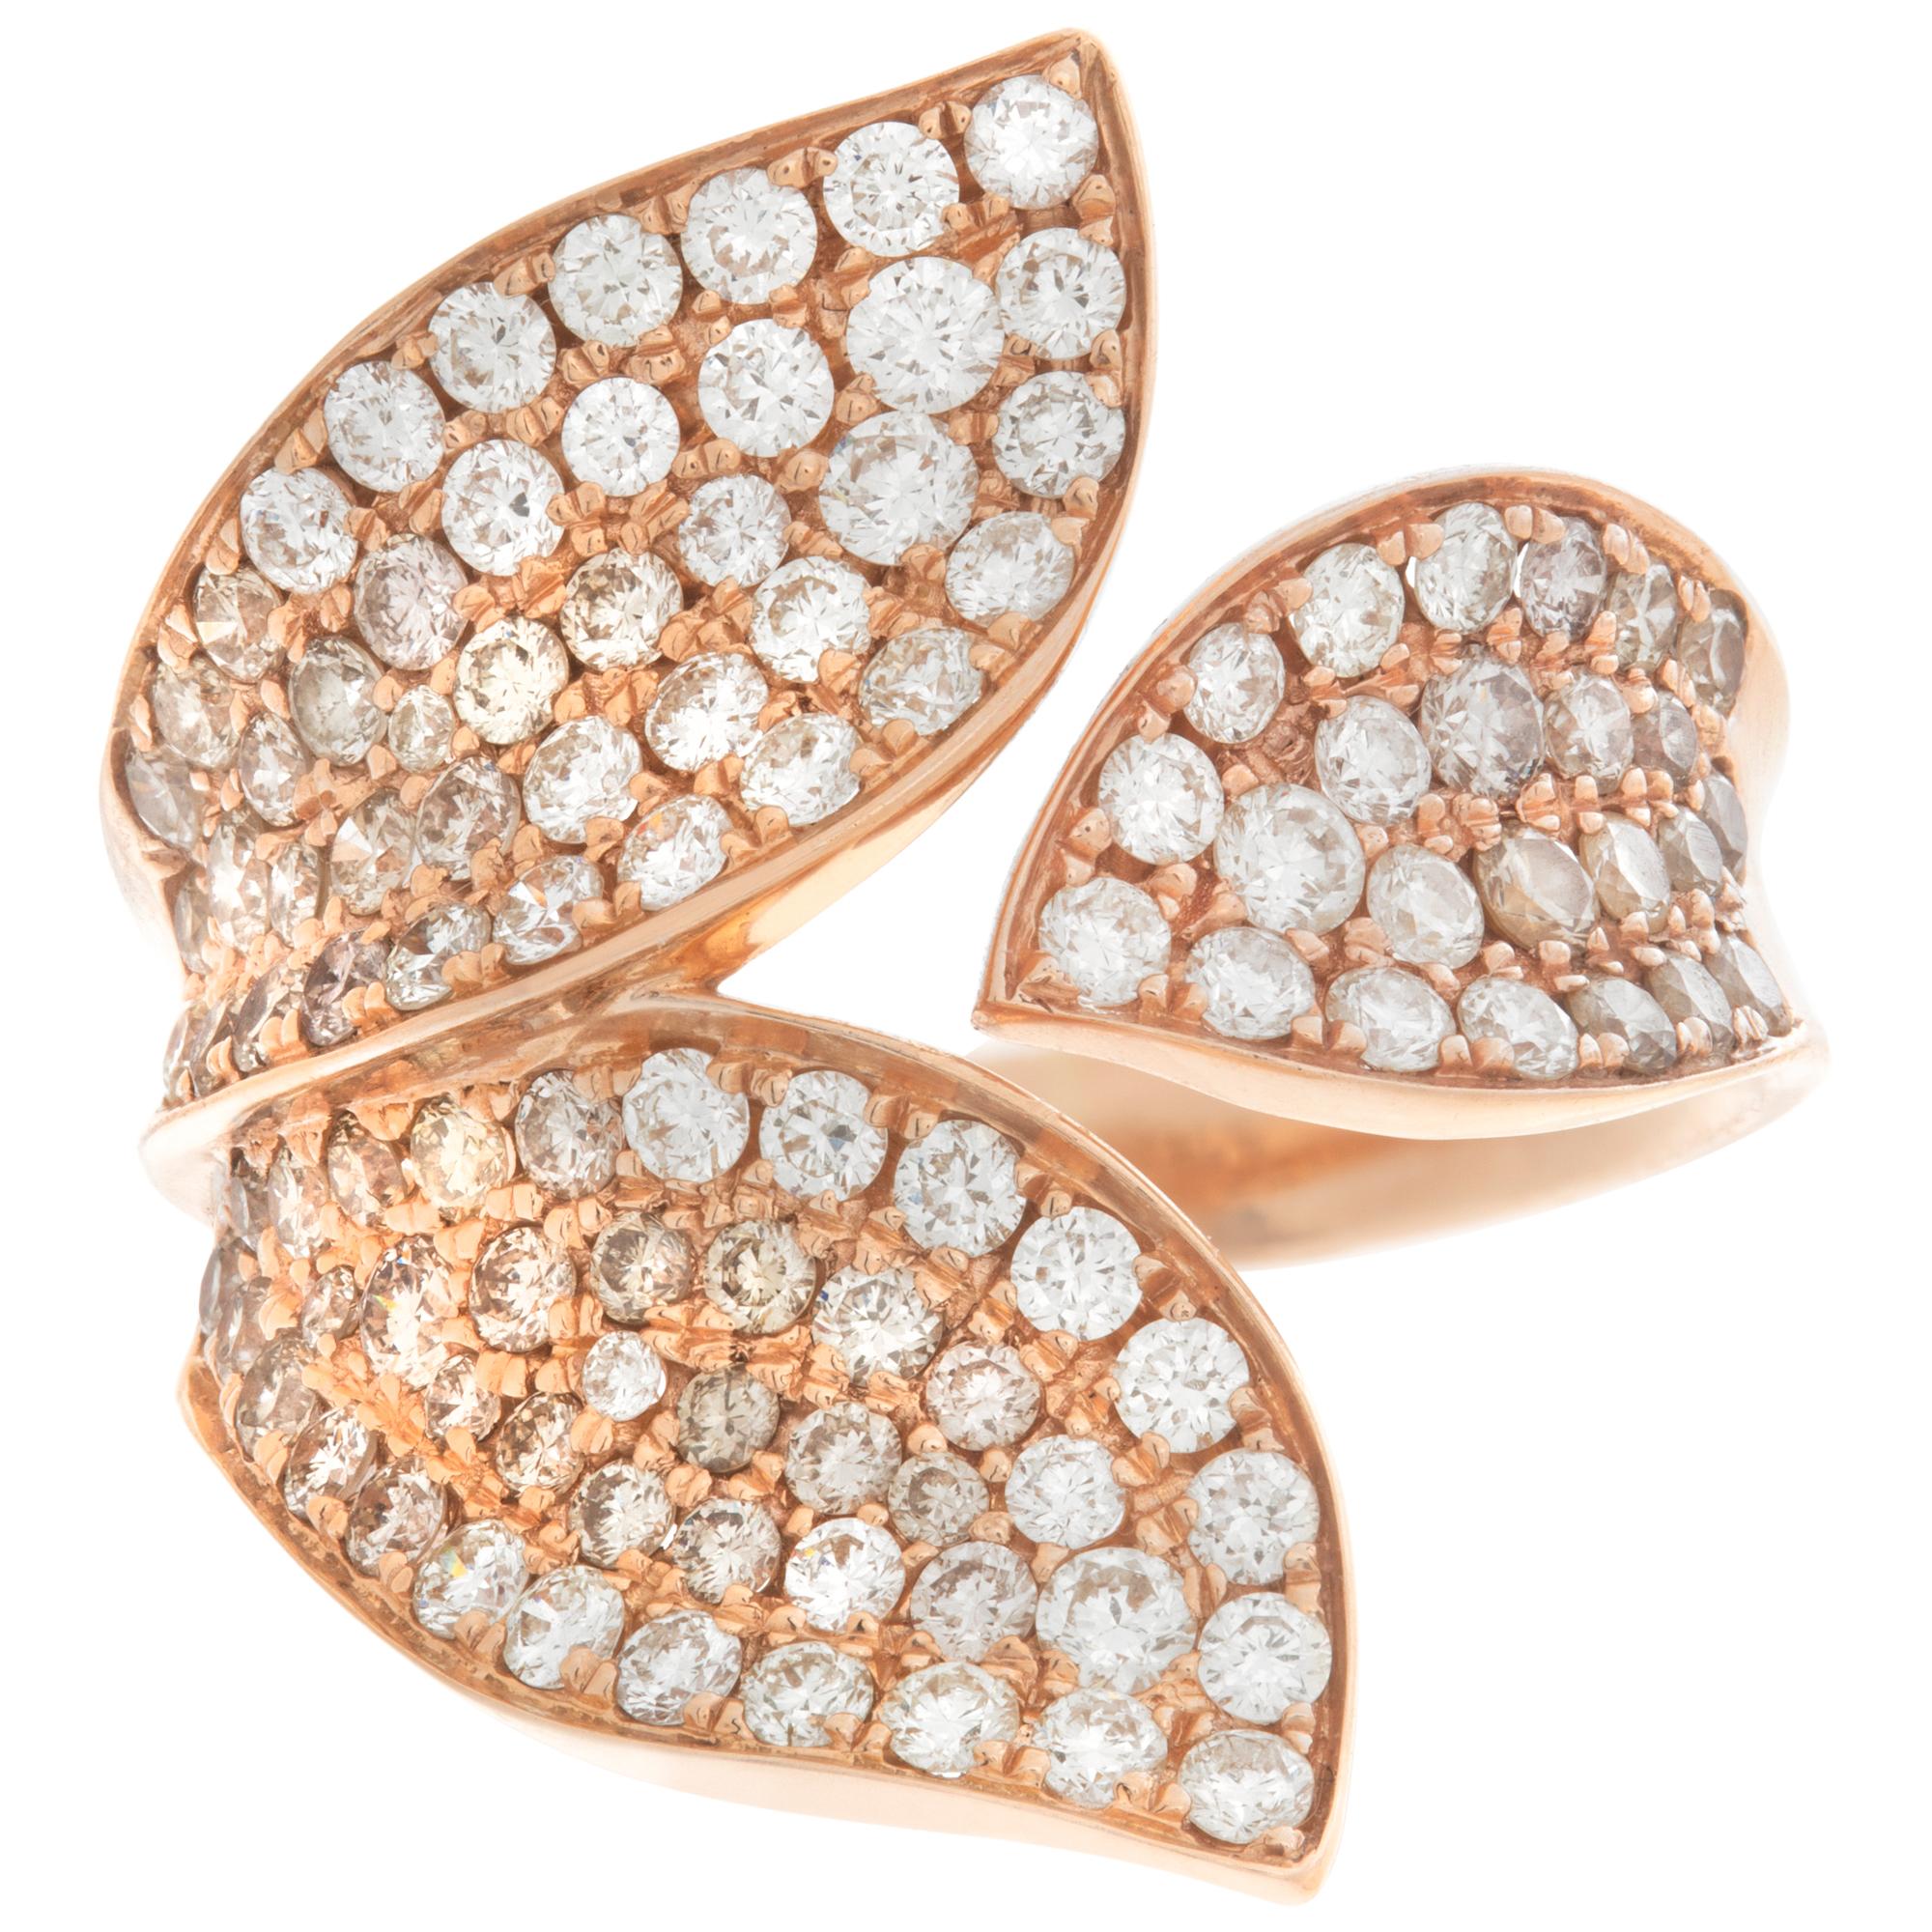 Diamond leaf ring in 18k rose gold with 1.38 carats in G-H color, VS clarity round brilliant cut diamonds. Size 6

This Diamond ring is currently size 6 and some items can be sized up or down, please ask! It weighs 3.8 pennyweights and is 18k rose